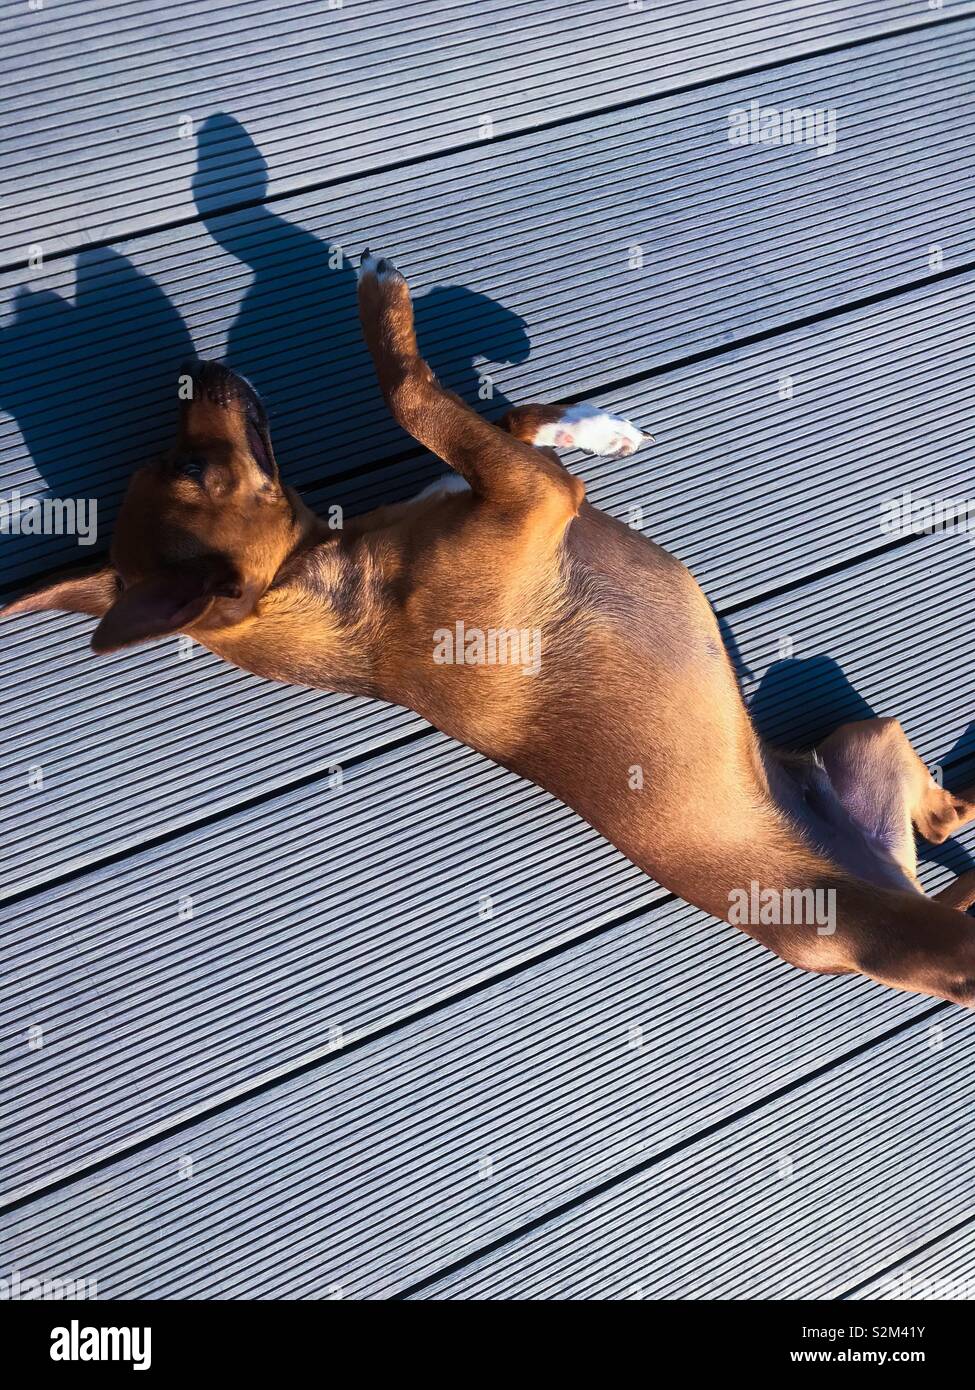 Dog lying on its back in the sun Stock Photo